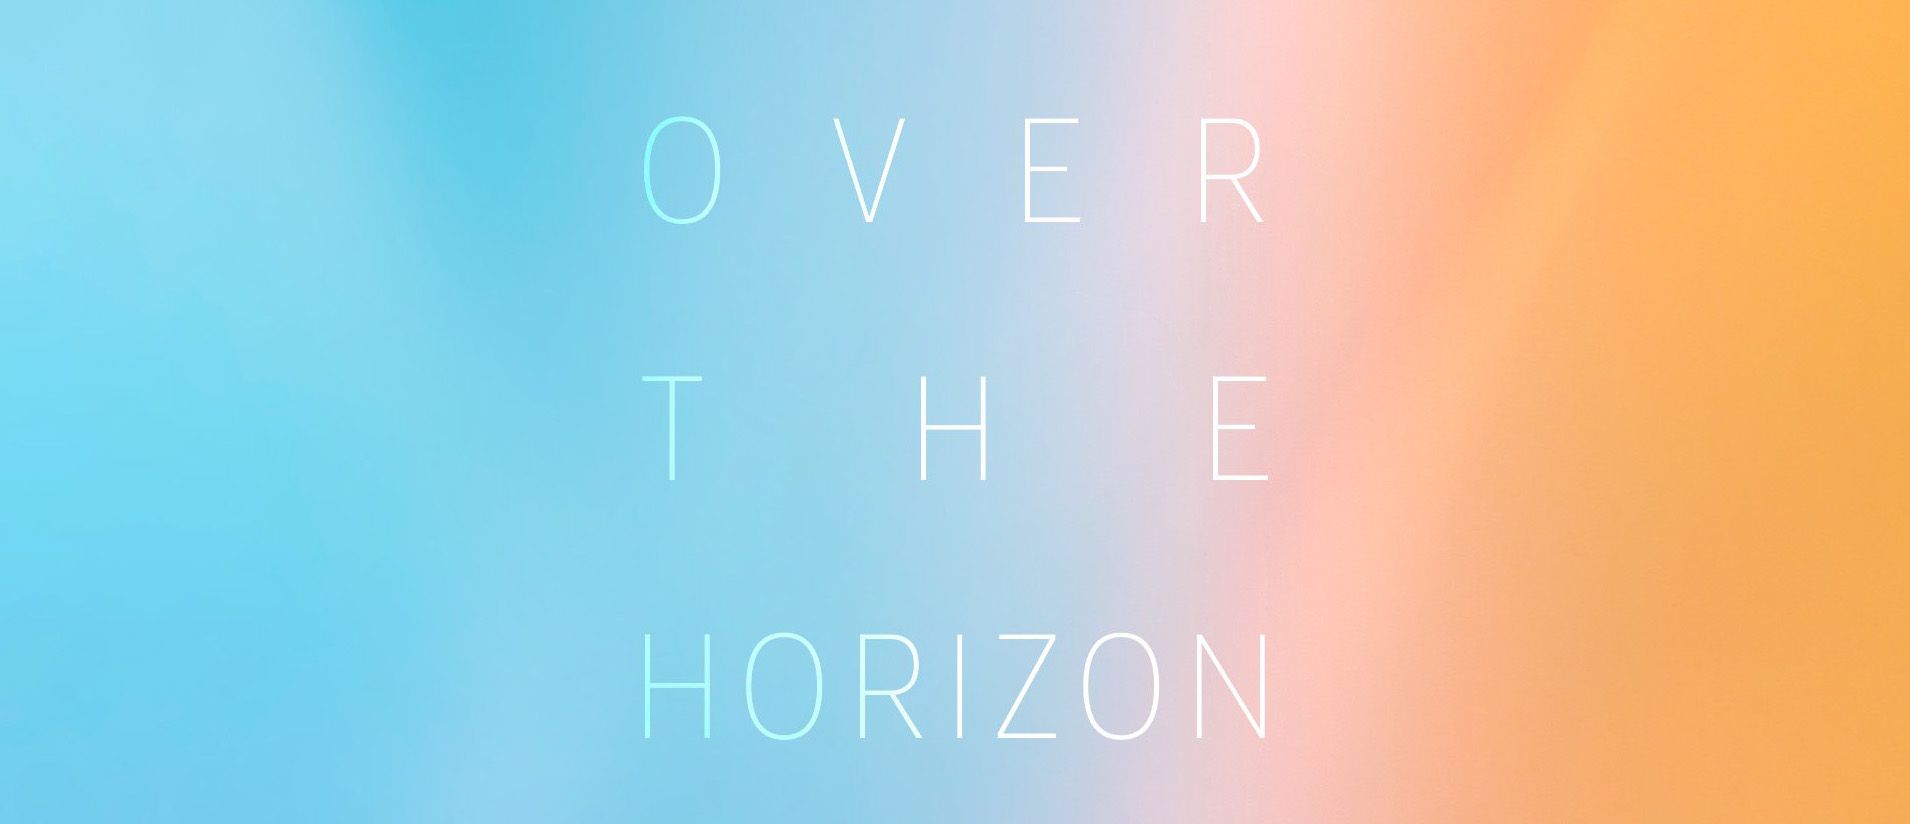 Here is Samsung's new Over the Horizon theme for the Galaxy S21 Droid